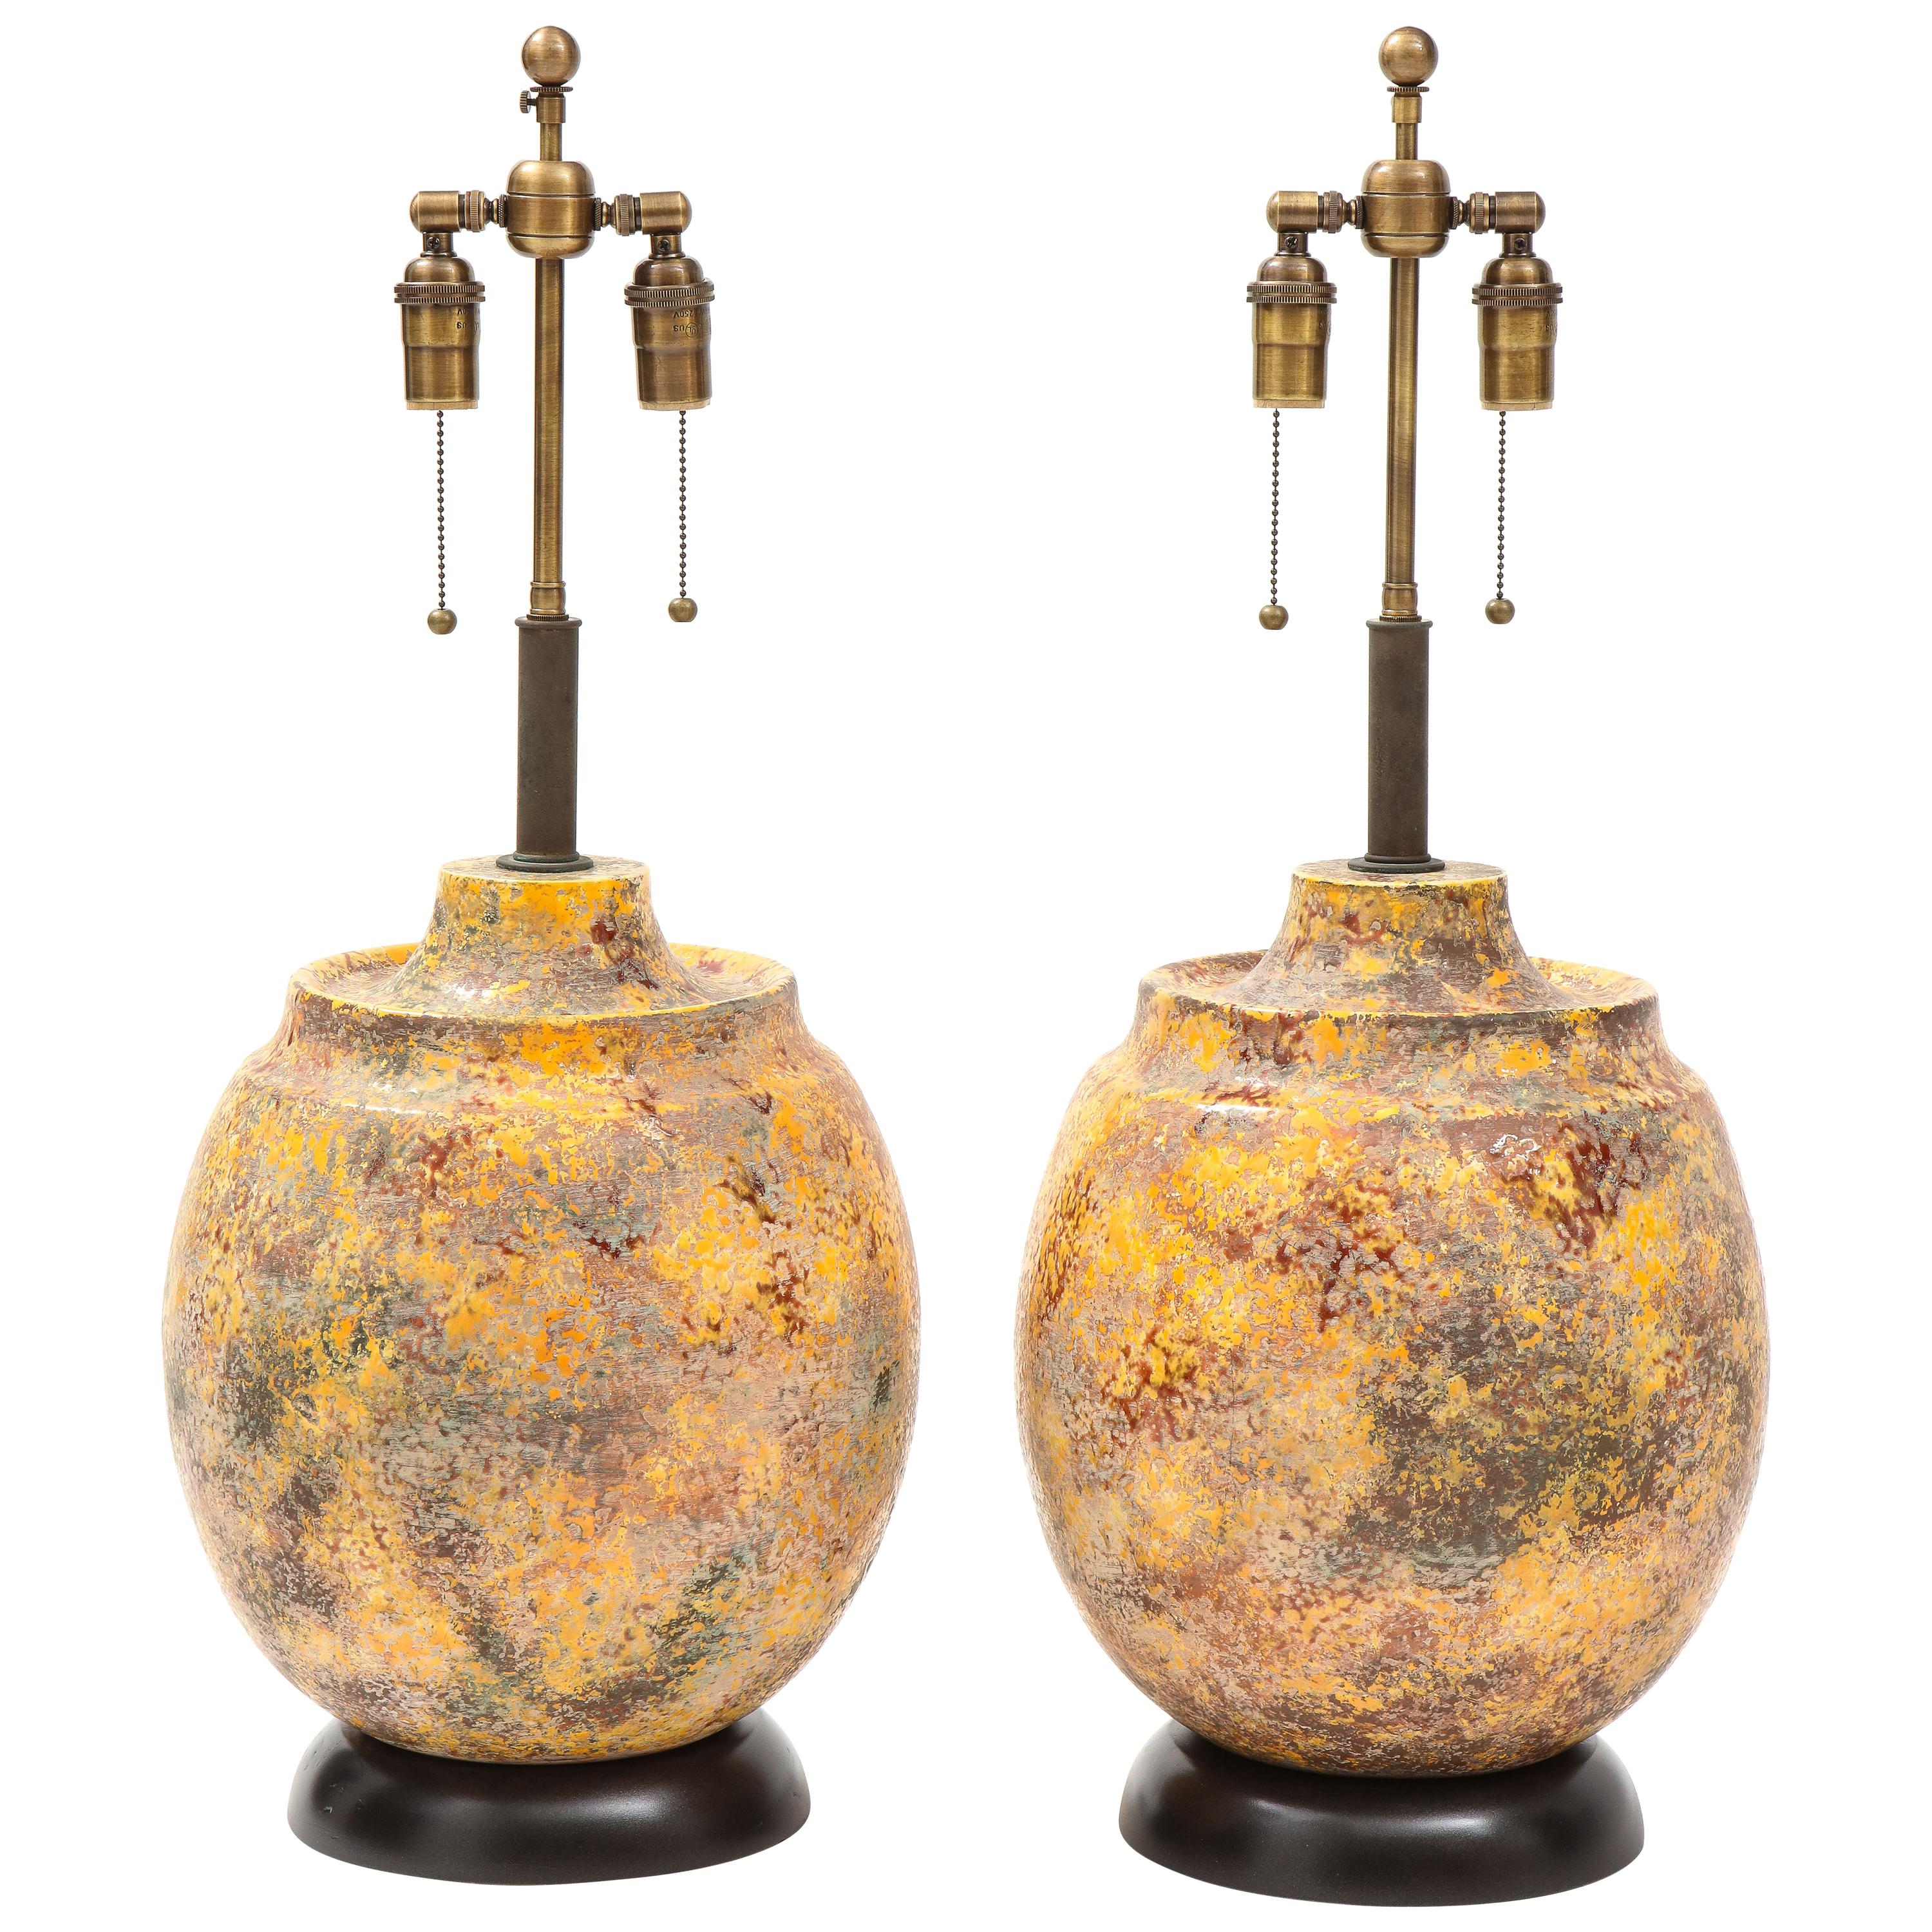 Pair of Large Italian Ceramic Lamps with a "Scavo" Glazed Finish